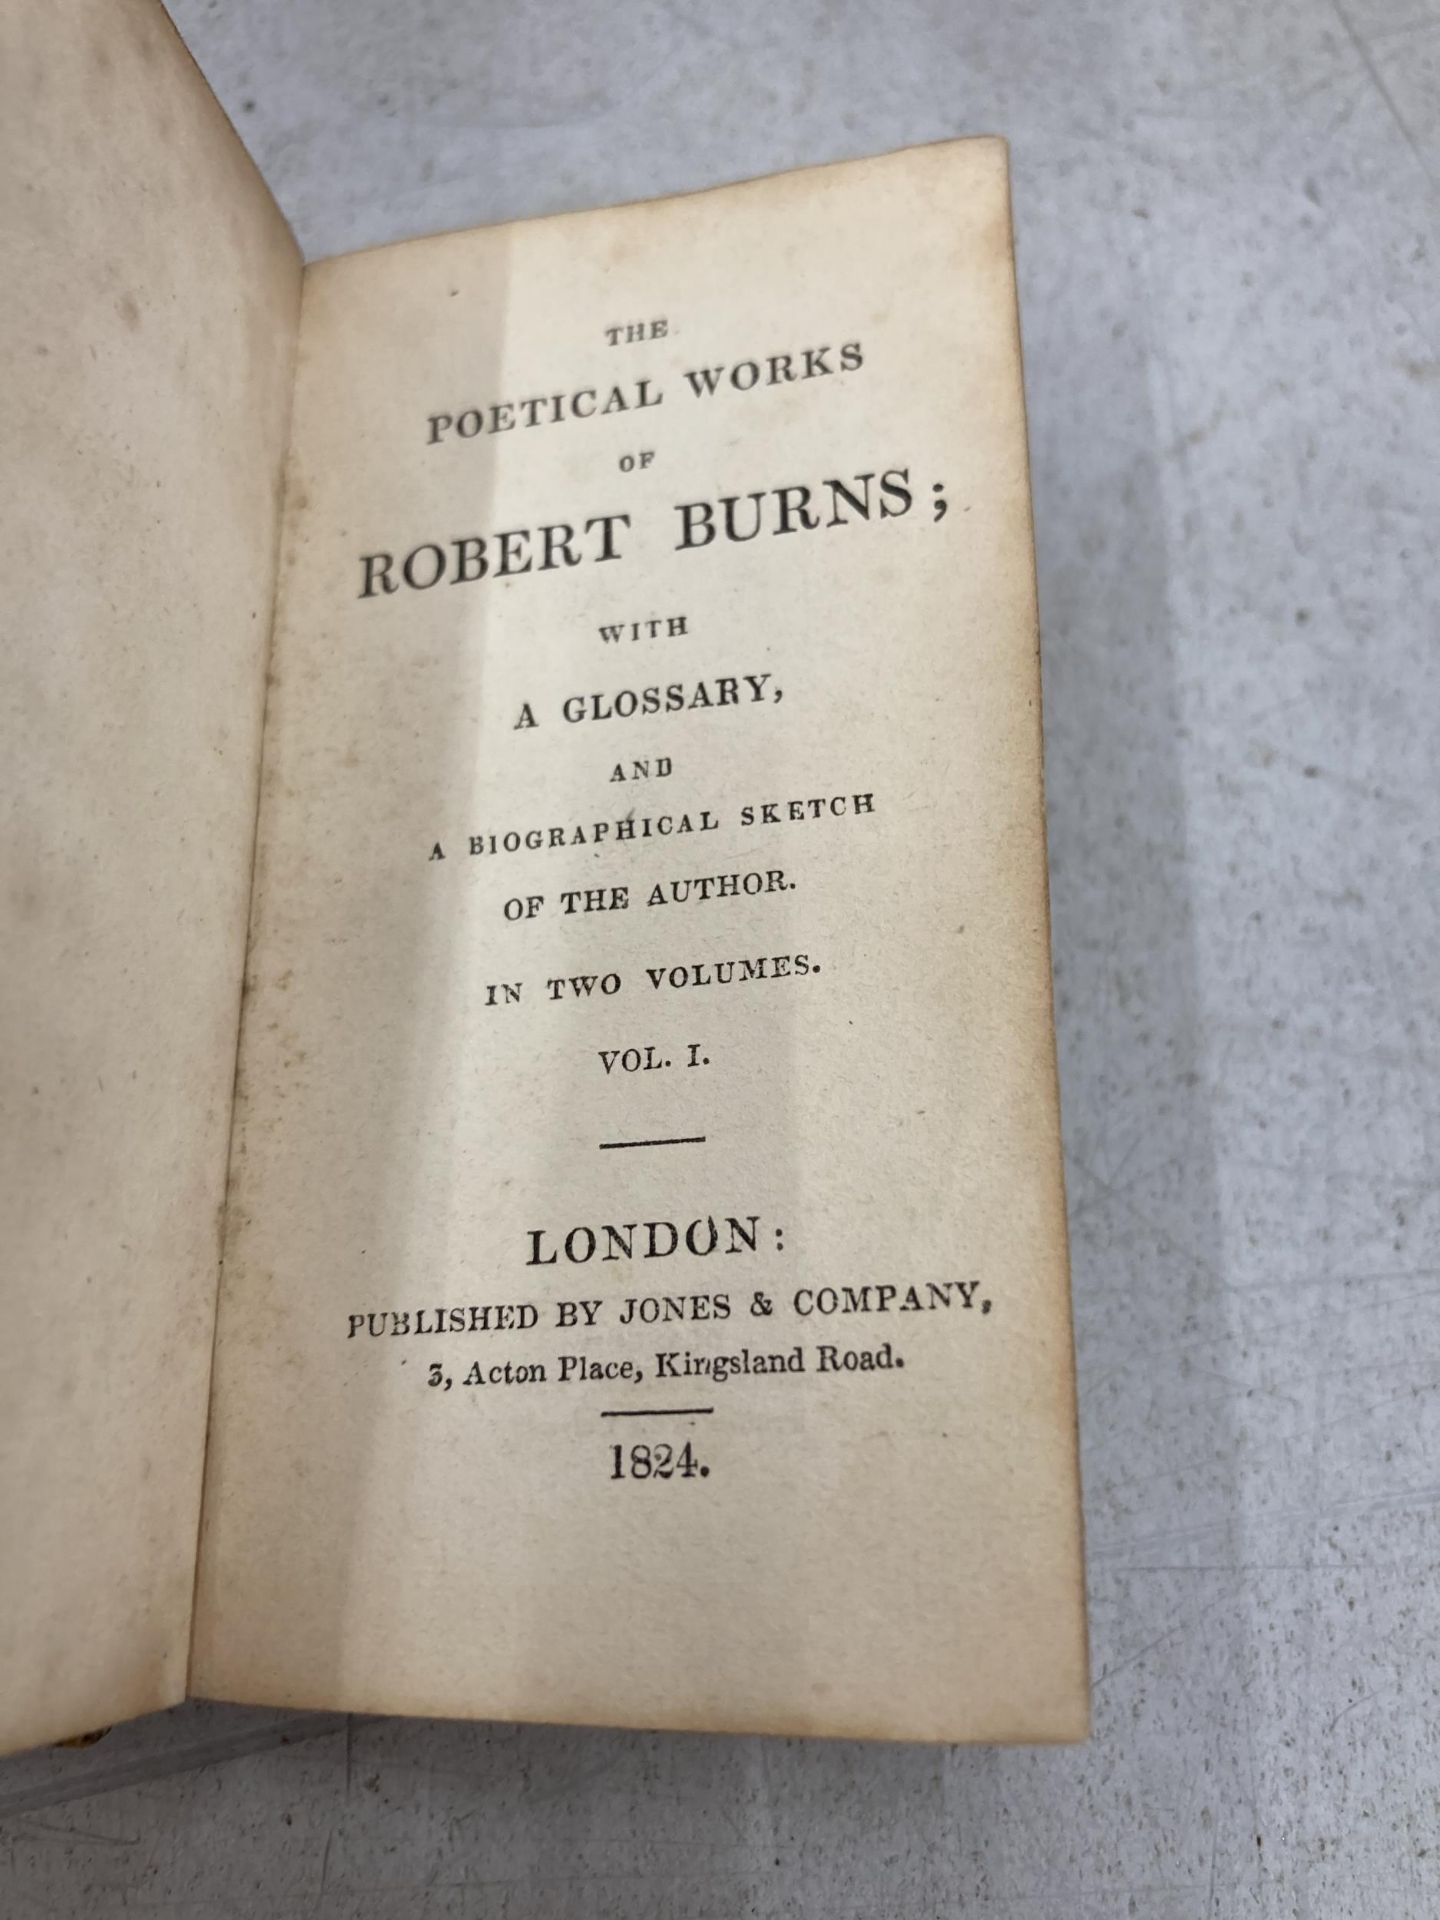 AN 1825 LEATHER BOUND MINIATURE BOOK - 'THE POETICAL WORKS OF ROBERT BURNS' - Bild 3 aus 6